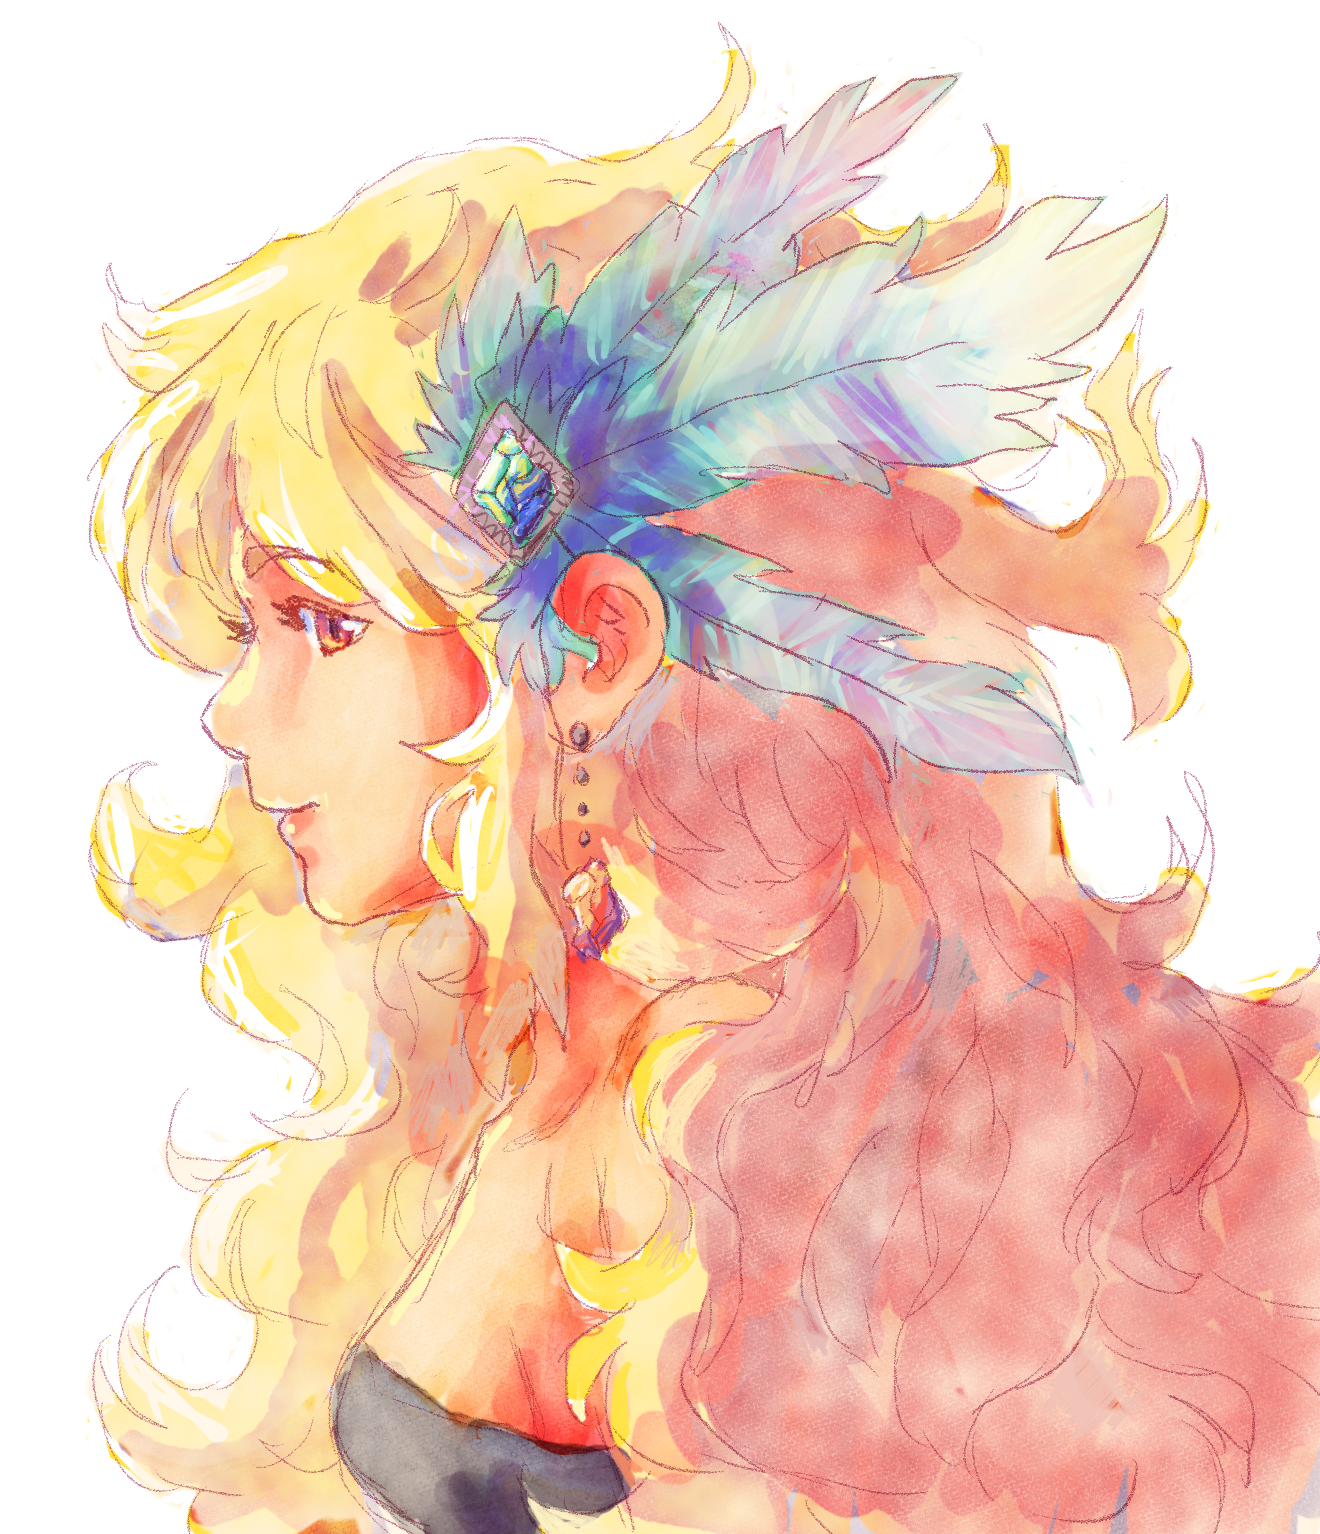 A watercolor looking illustration of a women with a large feathered jewel hair clip and a crystal hanging earring.